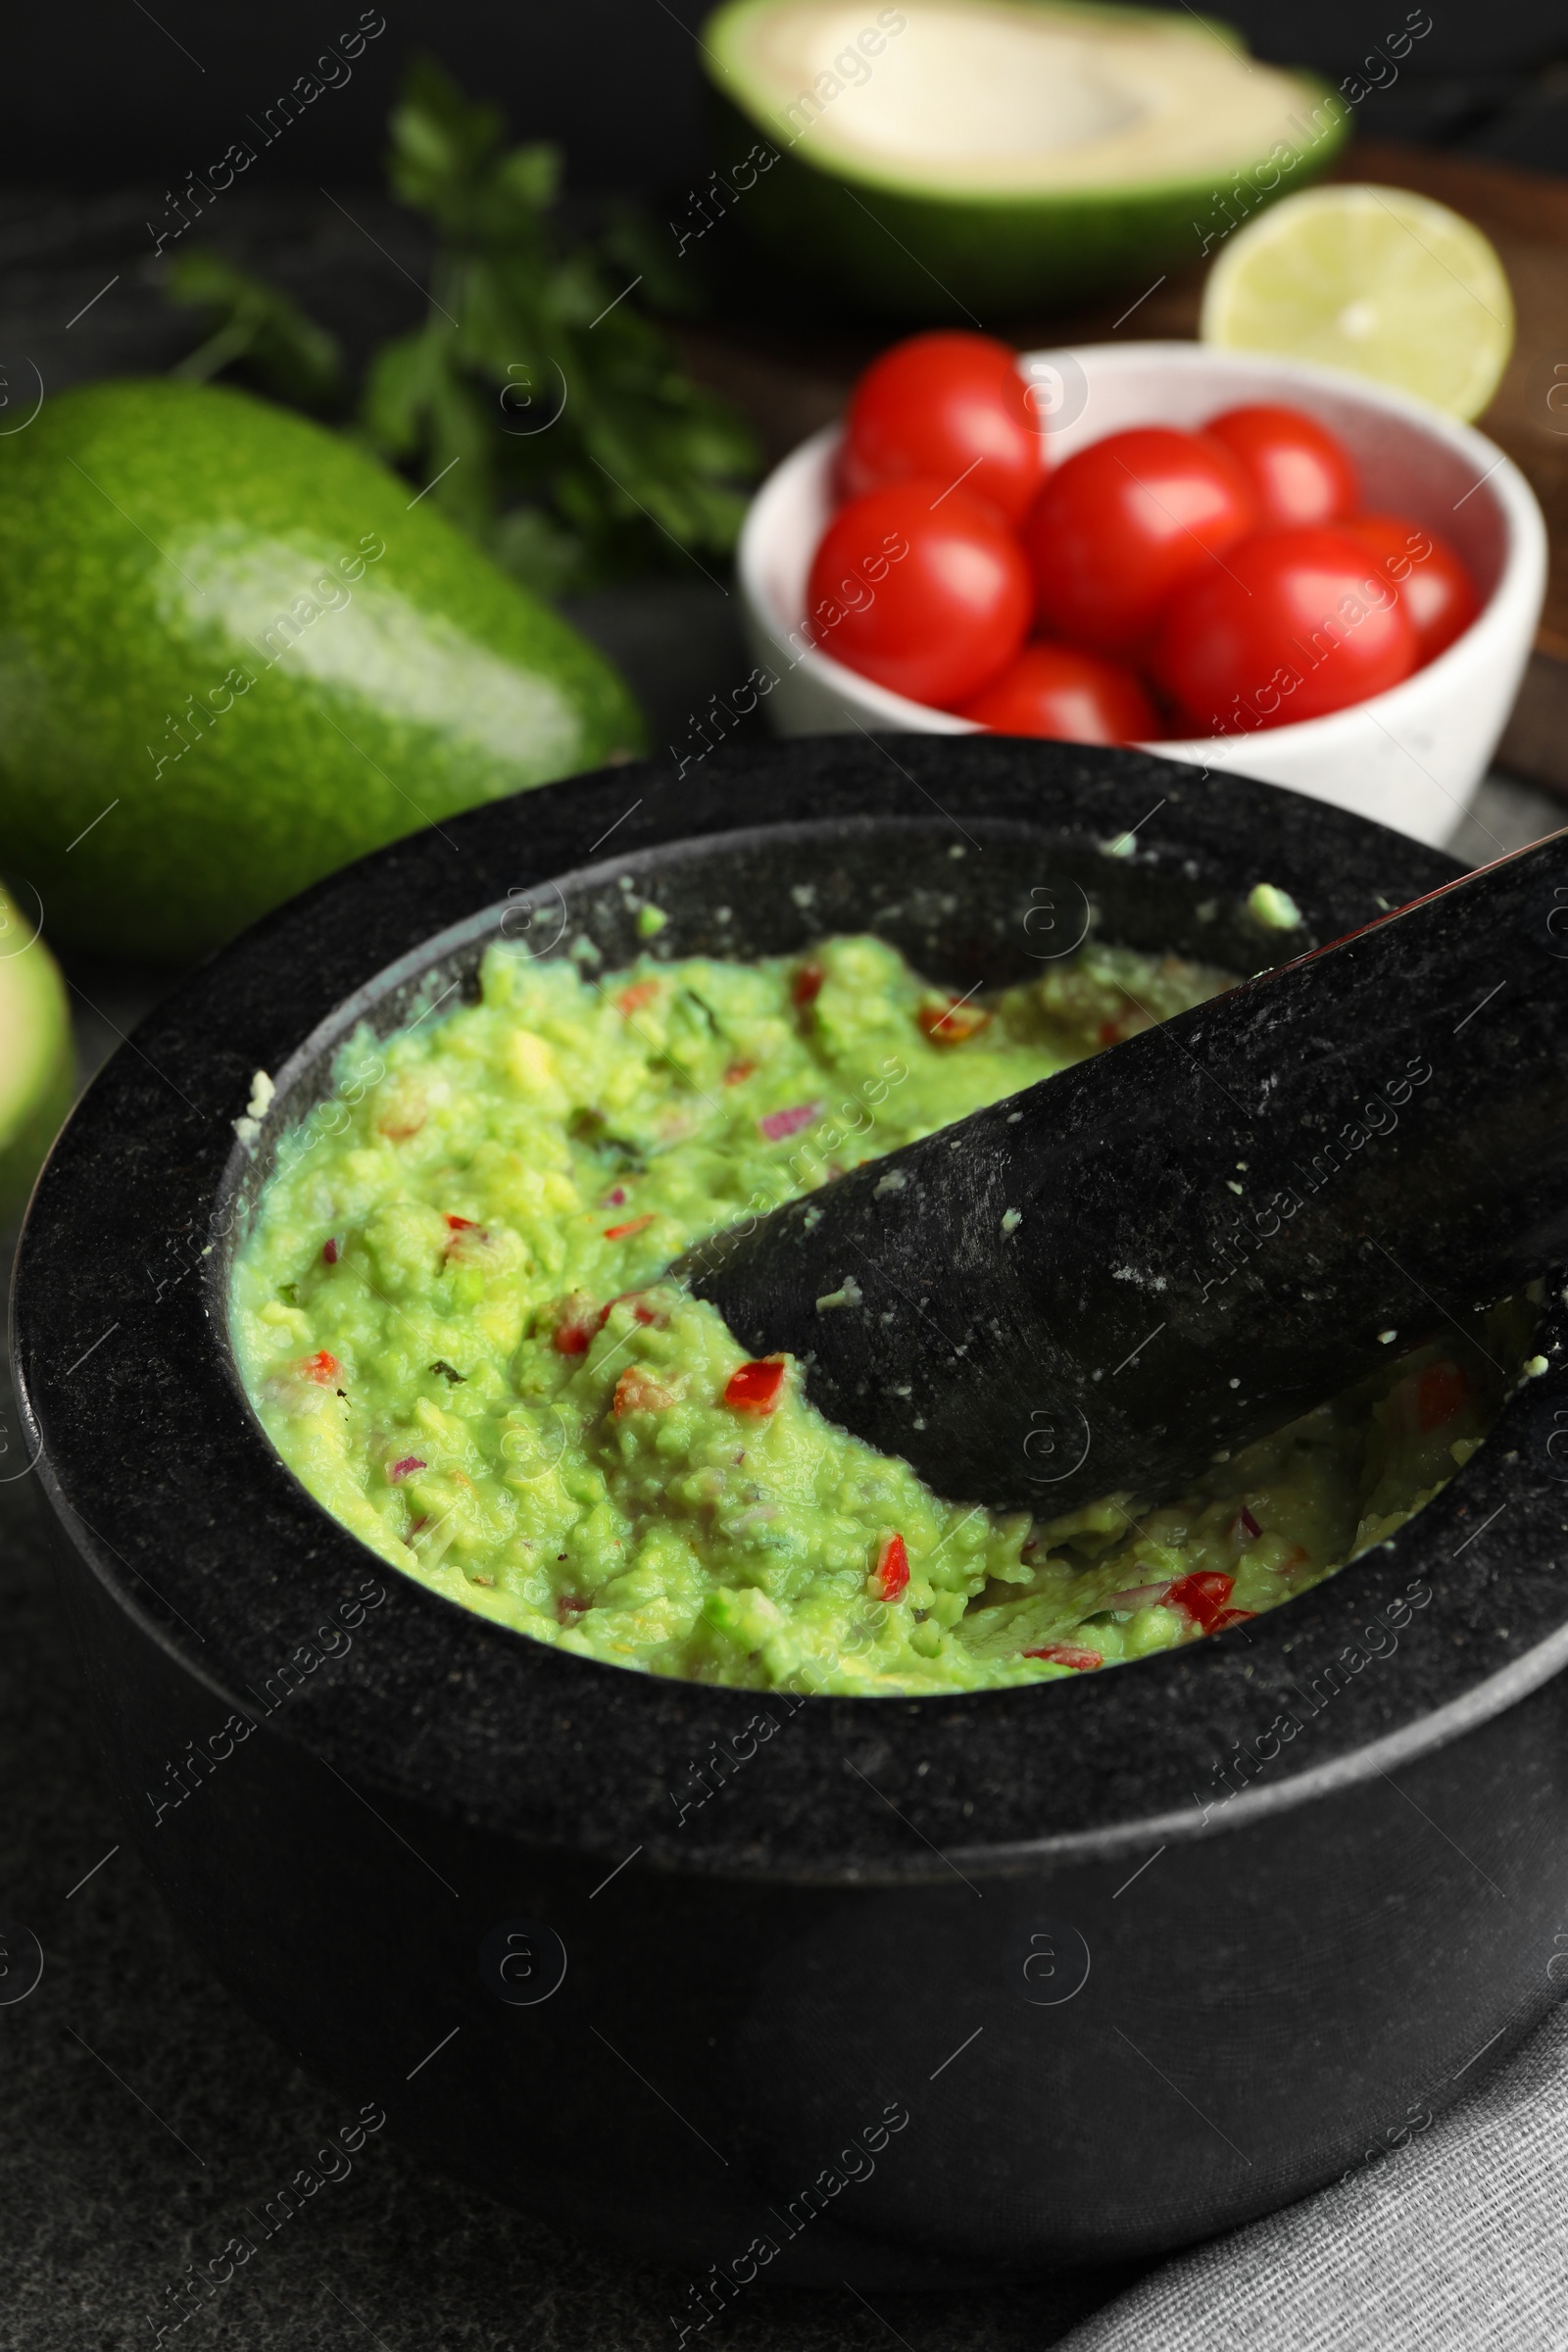 Photo of Mortar with delicious guacamole and ingredients on table